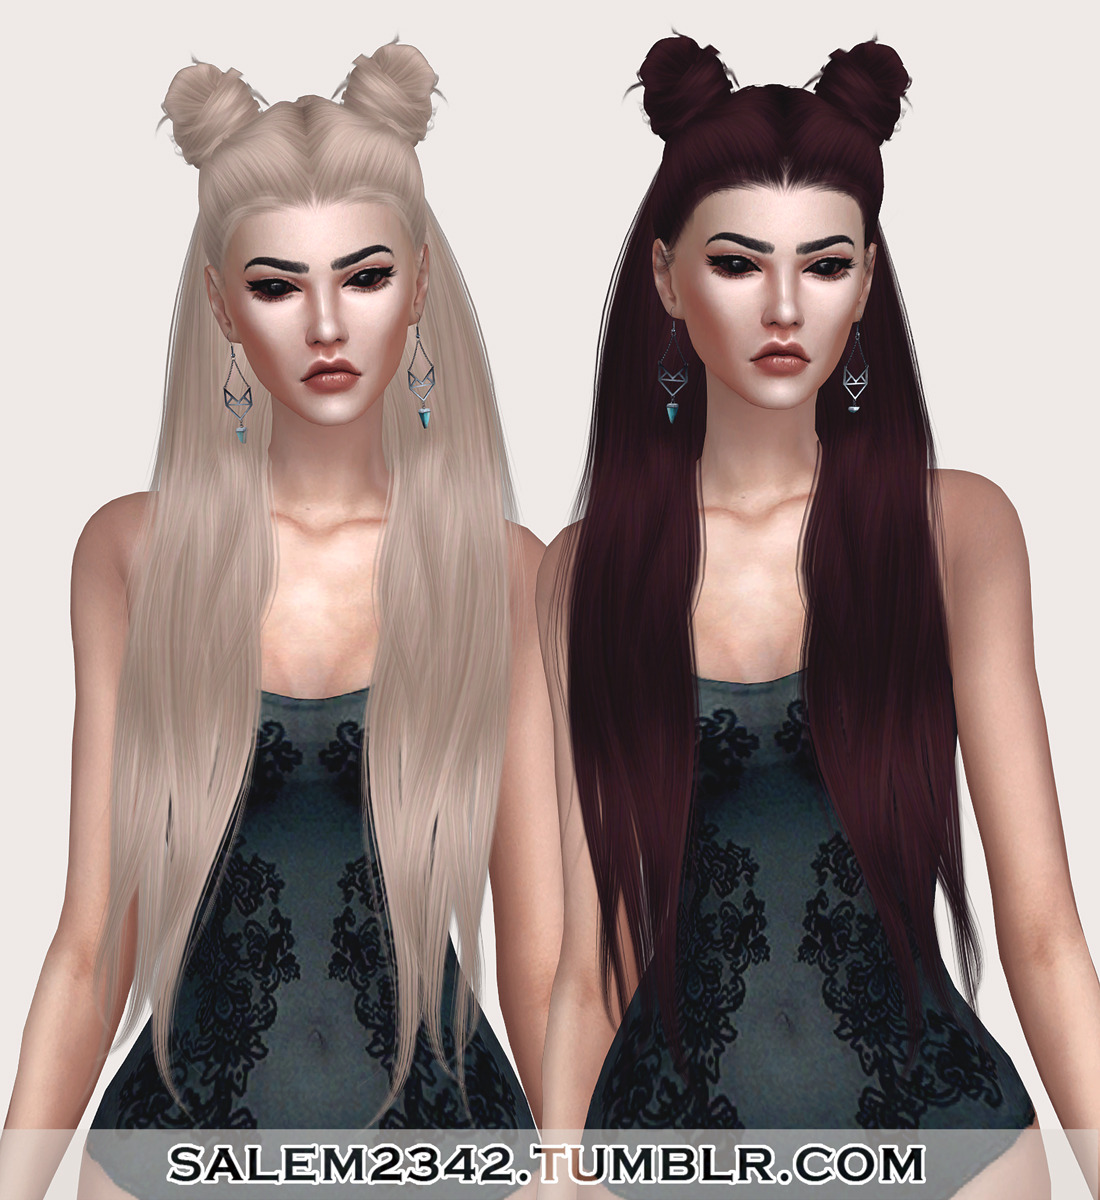 LeahLillith Little Piece Hair Retexture (TS4)• standalone
• 30 swatches
• MESH IS NOT INCLUDED -> download mesh (need!)
• textures by me
DOWNLOAD